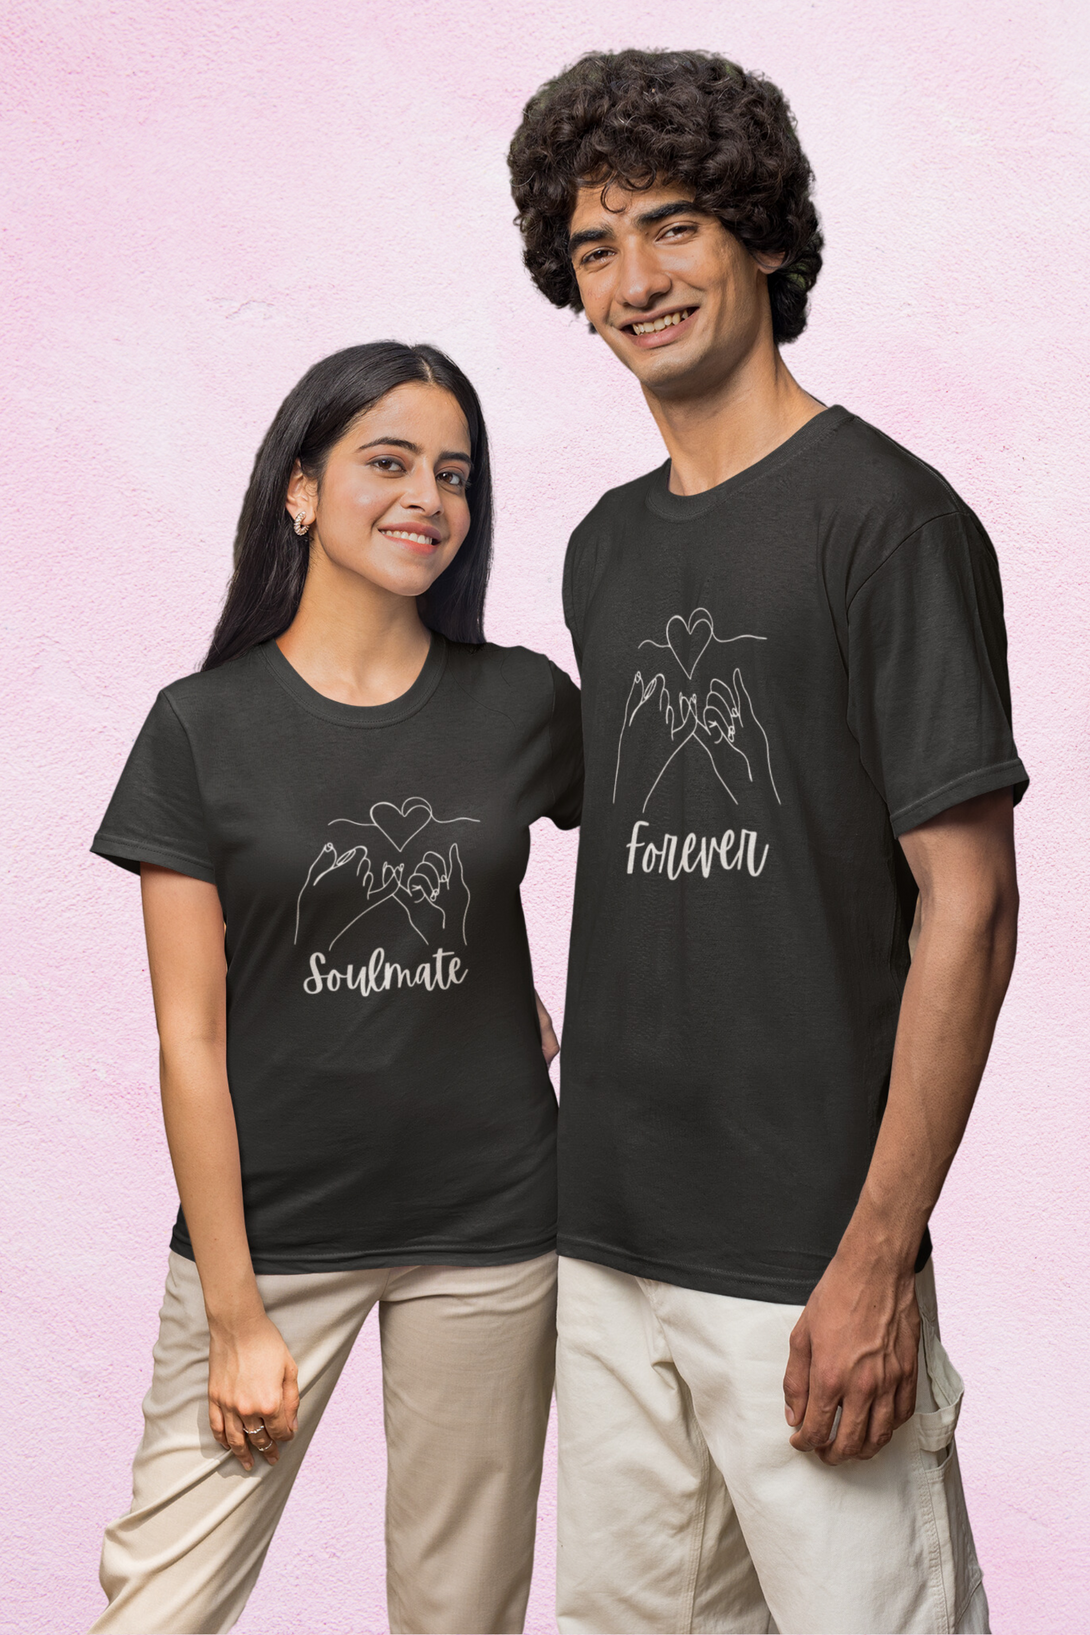 Soulmate Forever Couple T Shirt - WowWaves - 2